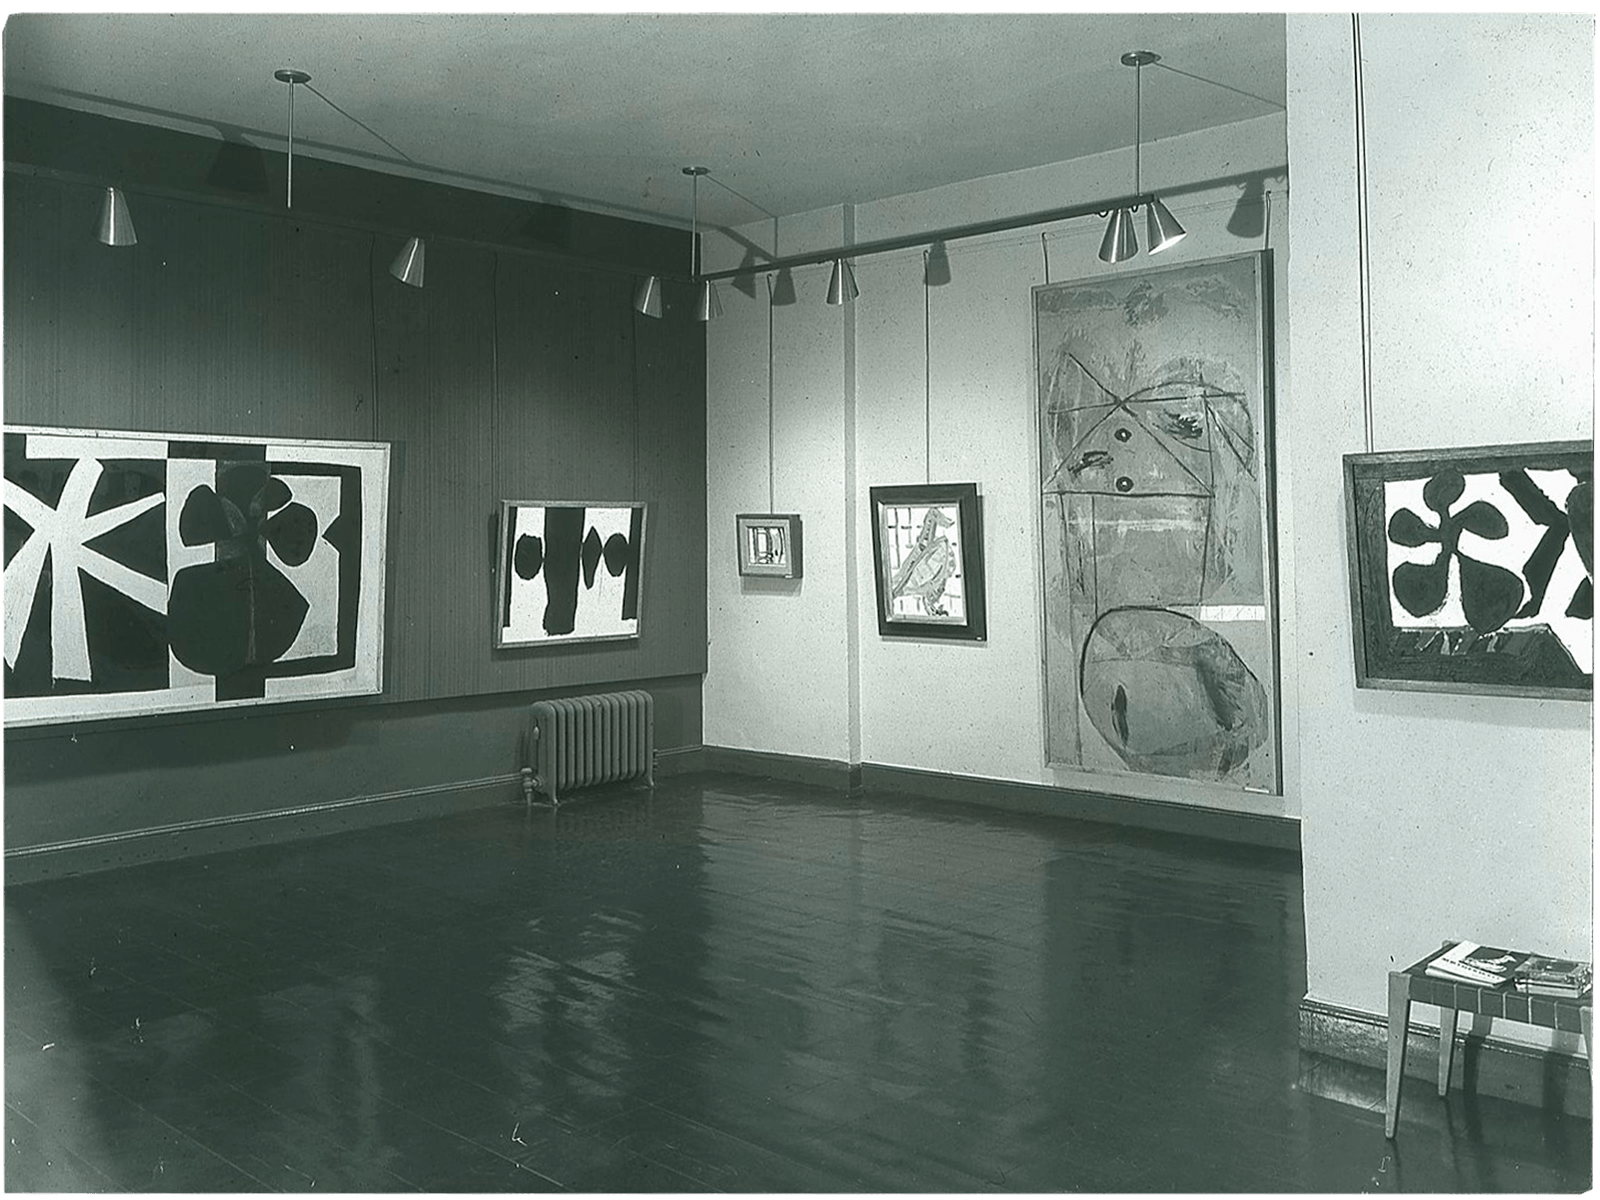 Installation view of "Robert Motherwell: Paintings, Drawings and Collages" at Samuel M. Kootz Gallery, New York, 1952